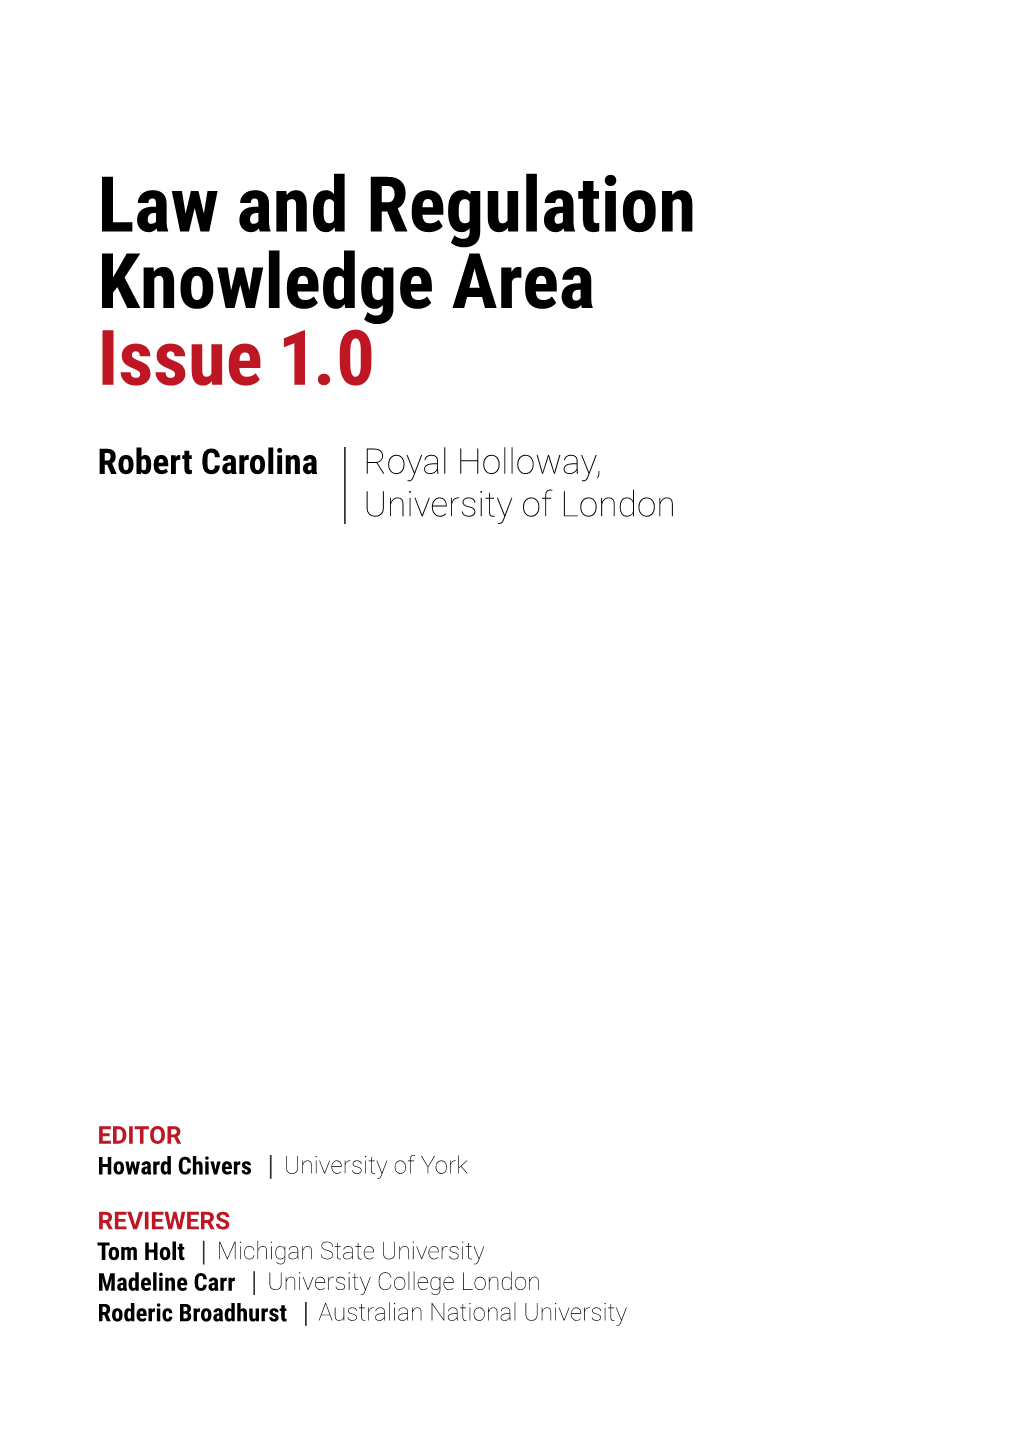 Law and Regulation Knowledge Area Issue